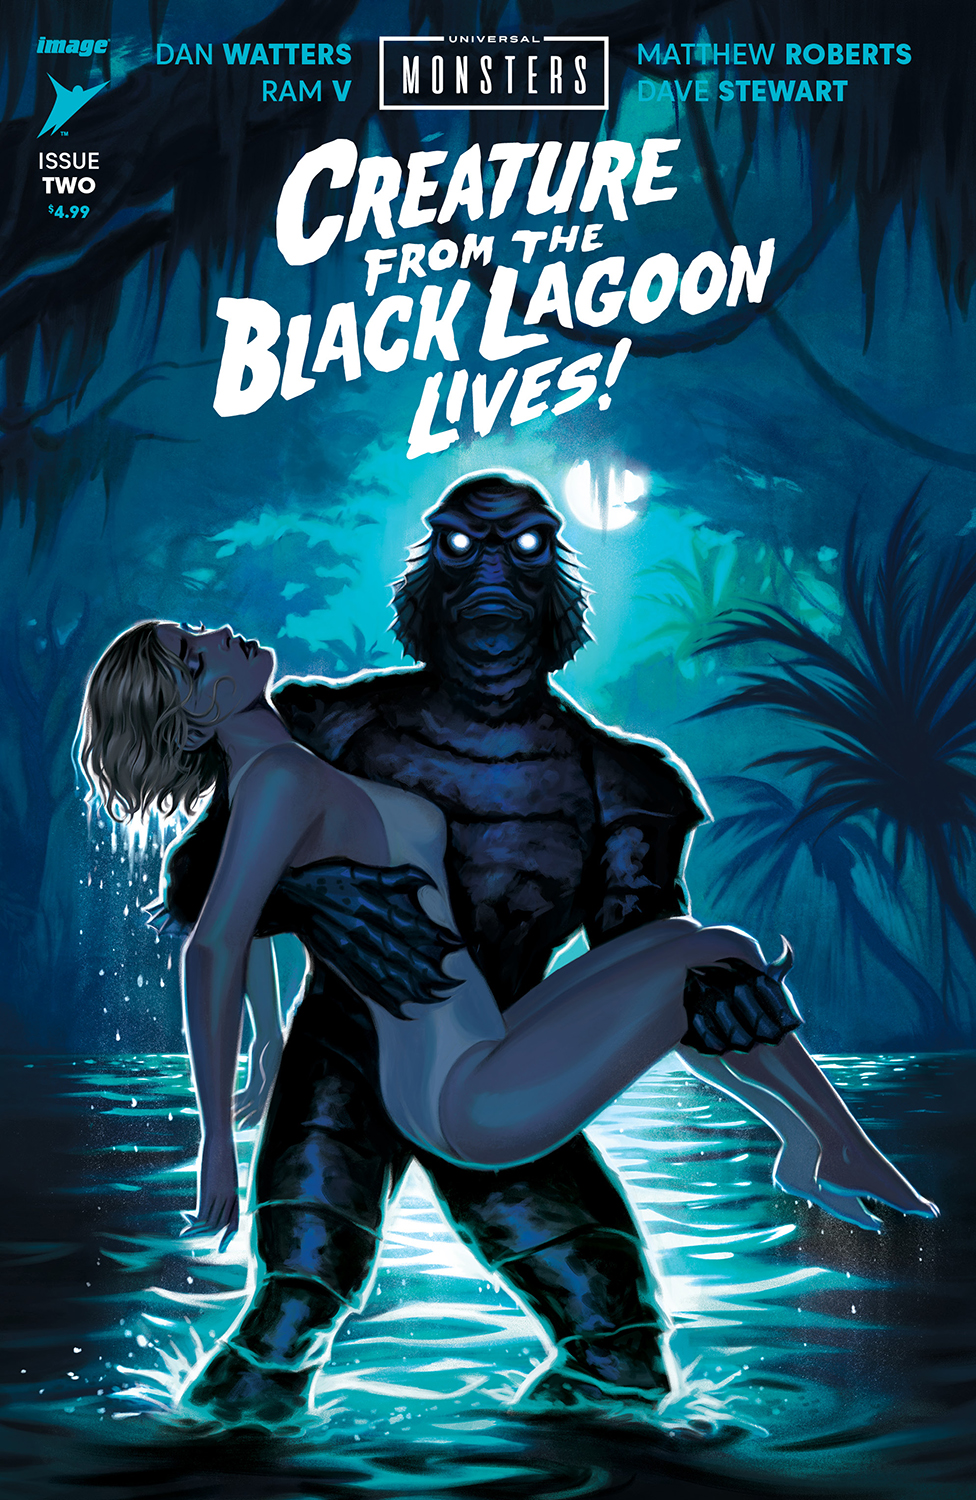 Universal Monsters the Creature from the Black Lagoon Lives #2 Cover E 1 for 50 Incentive Stephanie Pepper (Of 4)